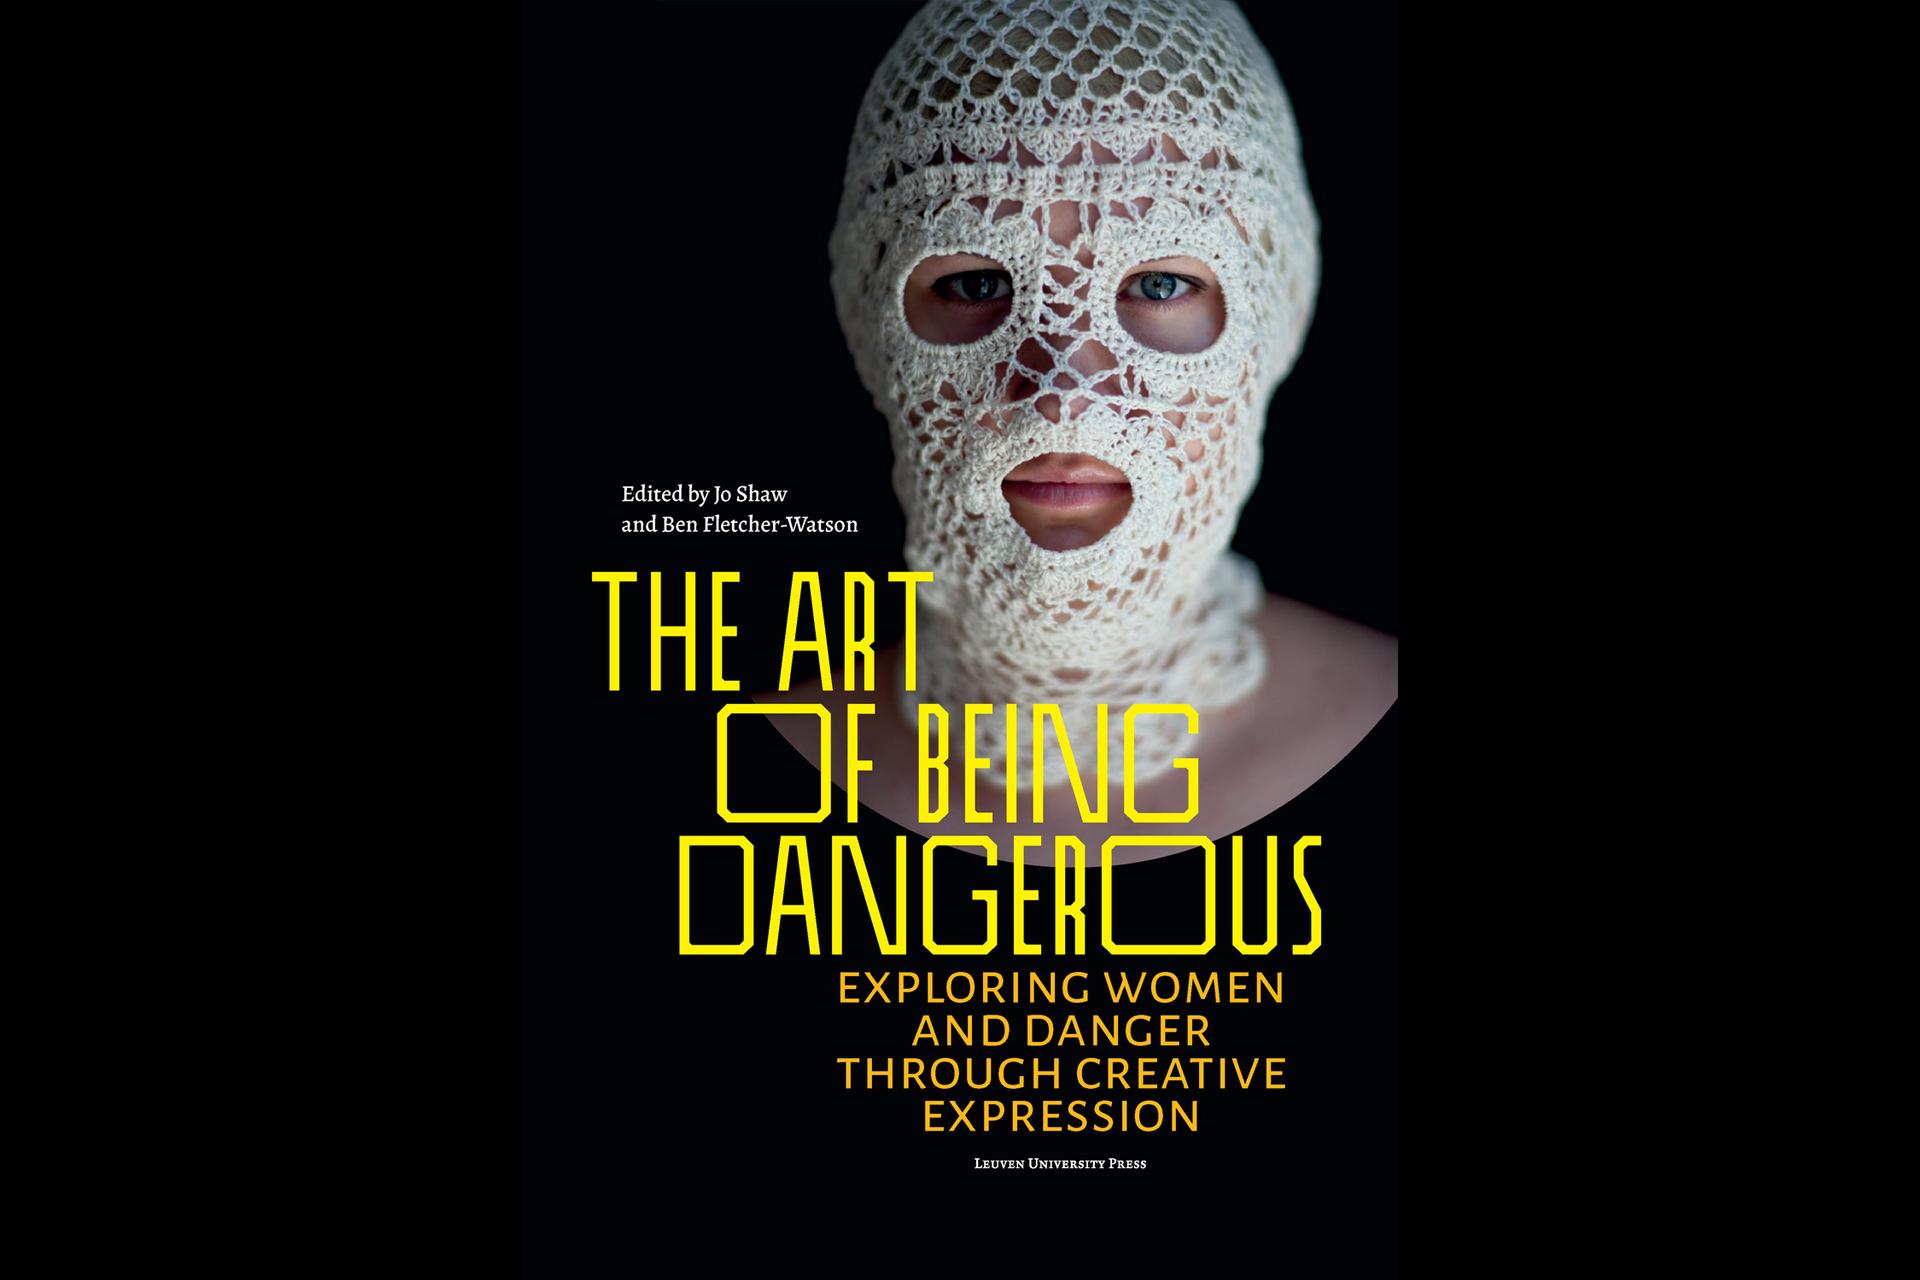 The Art of Being Dangerous